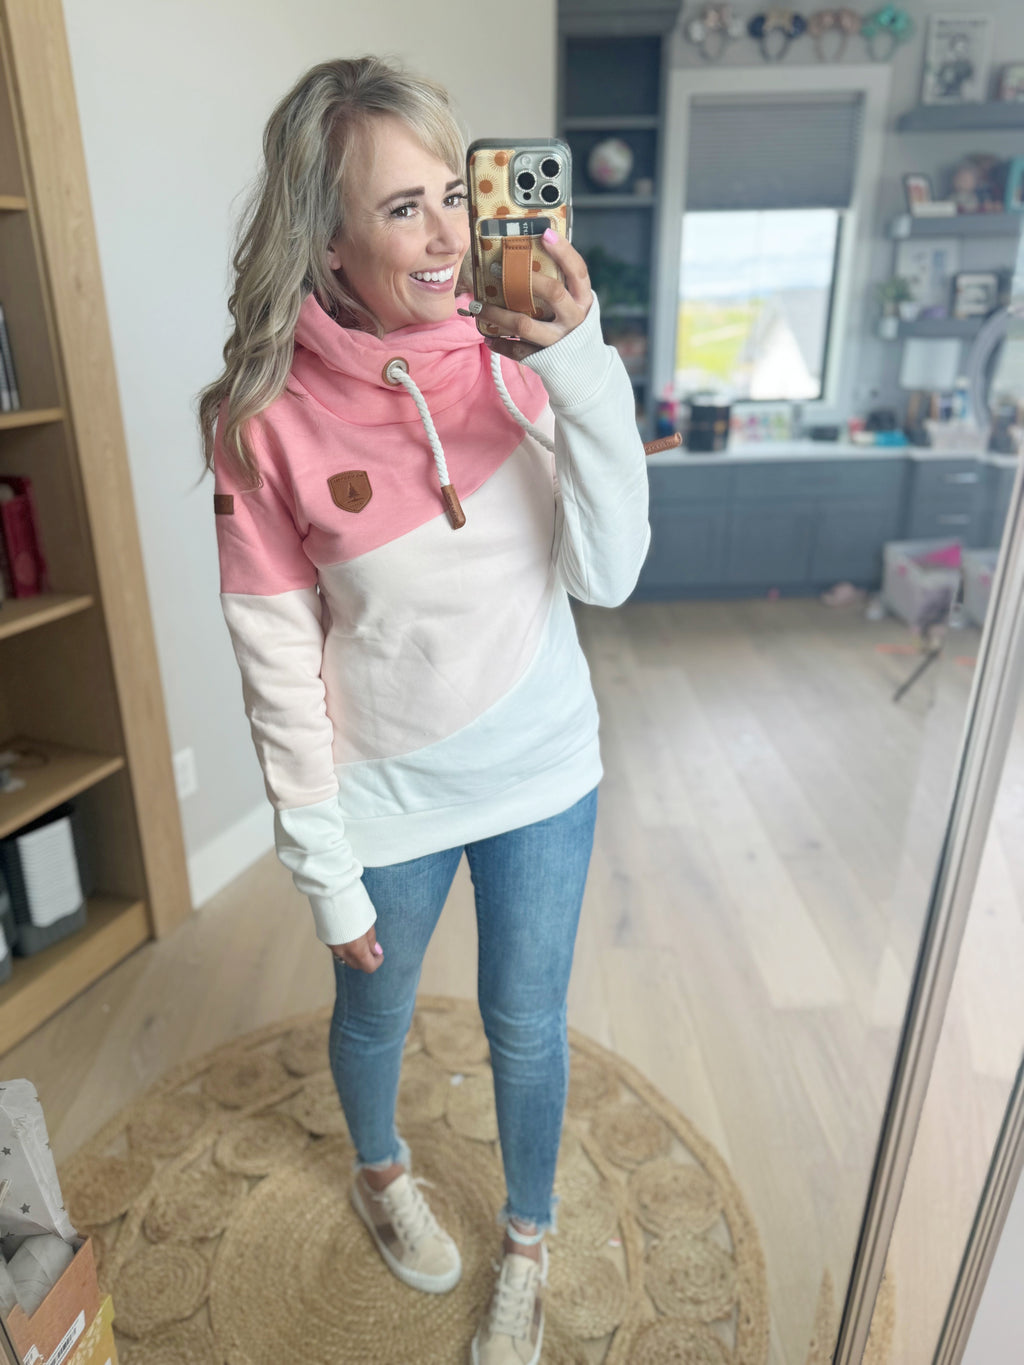 Wanakome Walk On The Wild Side Hoodie in Pink, Blush, and White